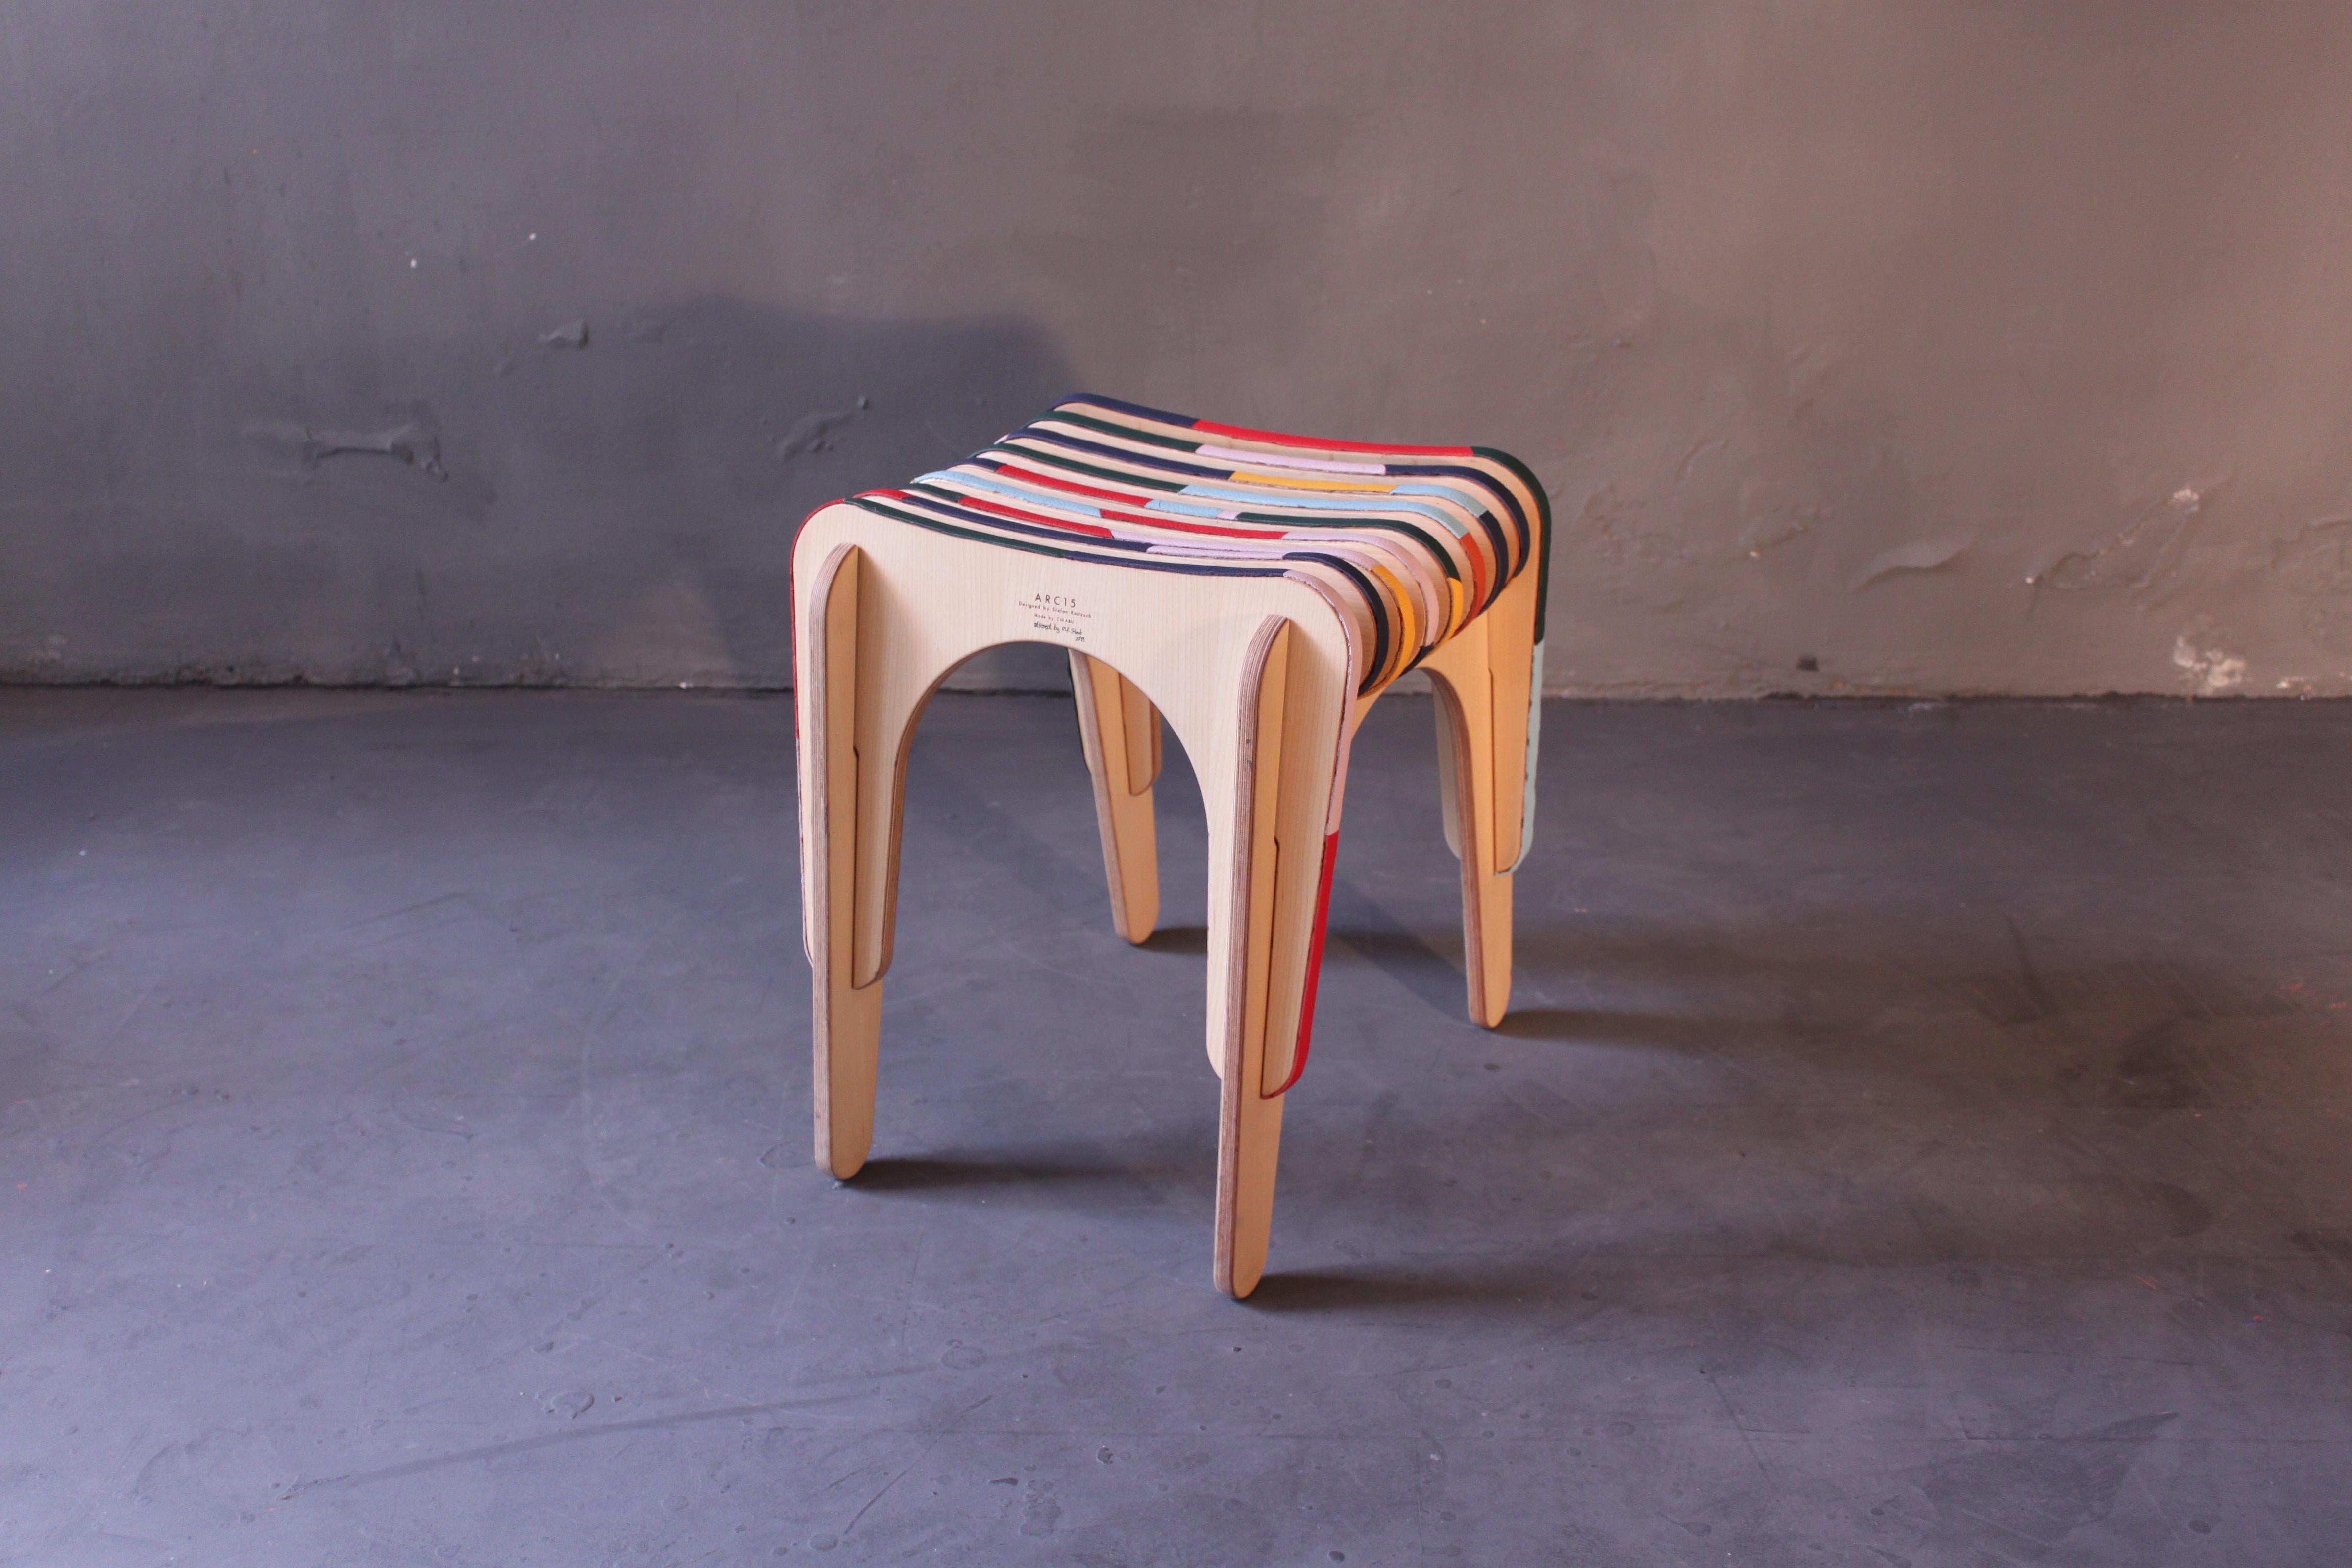 Colaboration between Praunheimer Werkstätten and Markus Friedrich Staab, different leather stripes added to make this stool one of a kind.

• Born 1964 in Aschaffenburg, Germany
• Since 1986 active as a visual artist
• Since 1989 national and